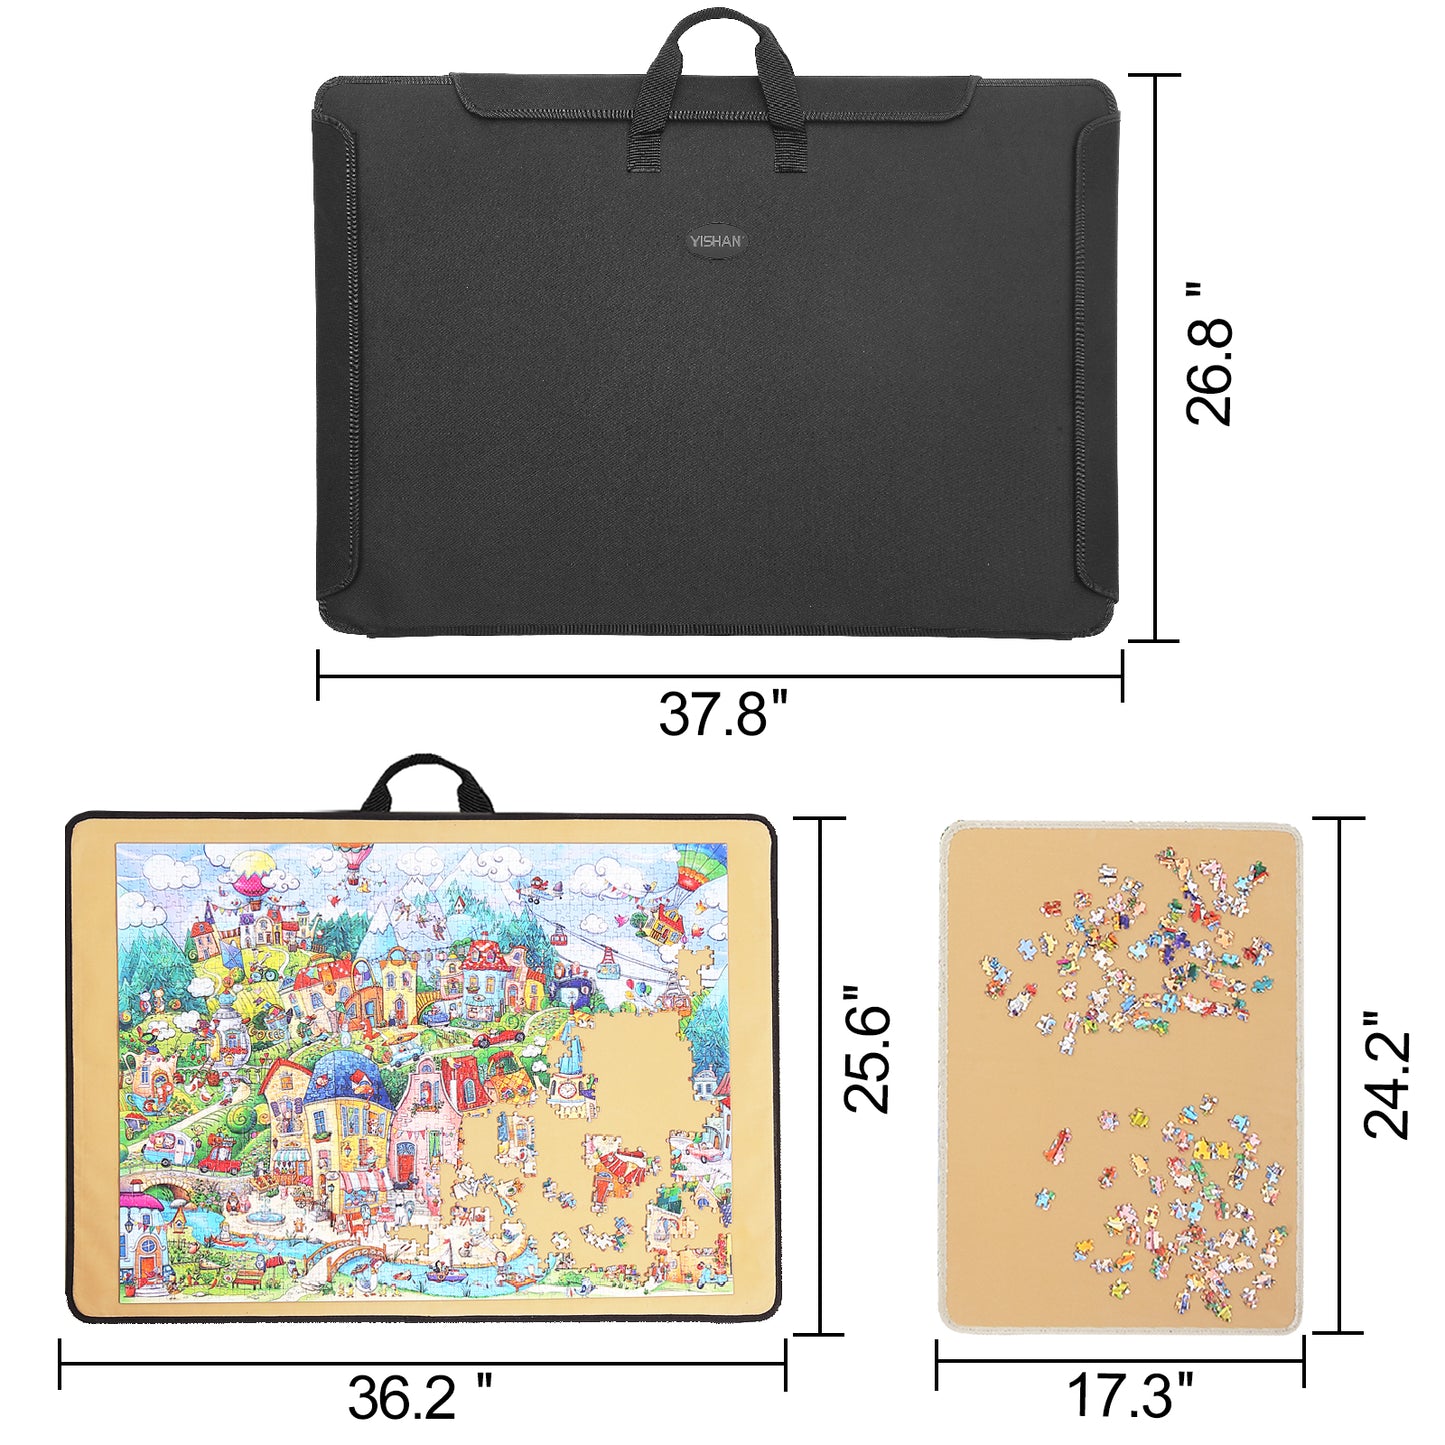 Portable Jigsaw Puzzle Board with Sorting Trays- 1500 Pieces - Fabric